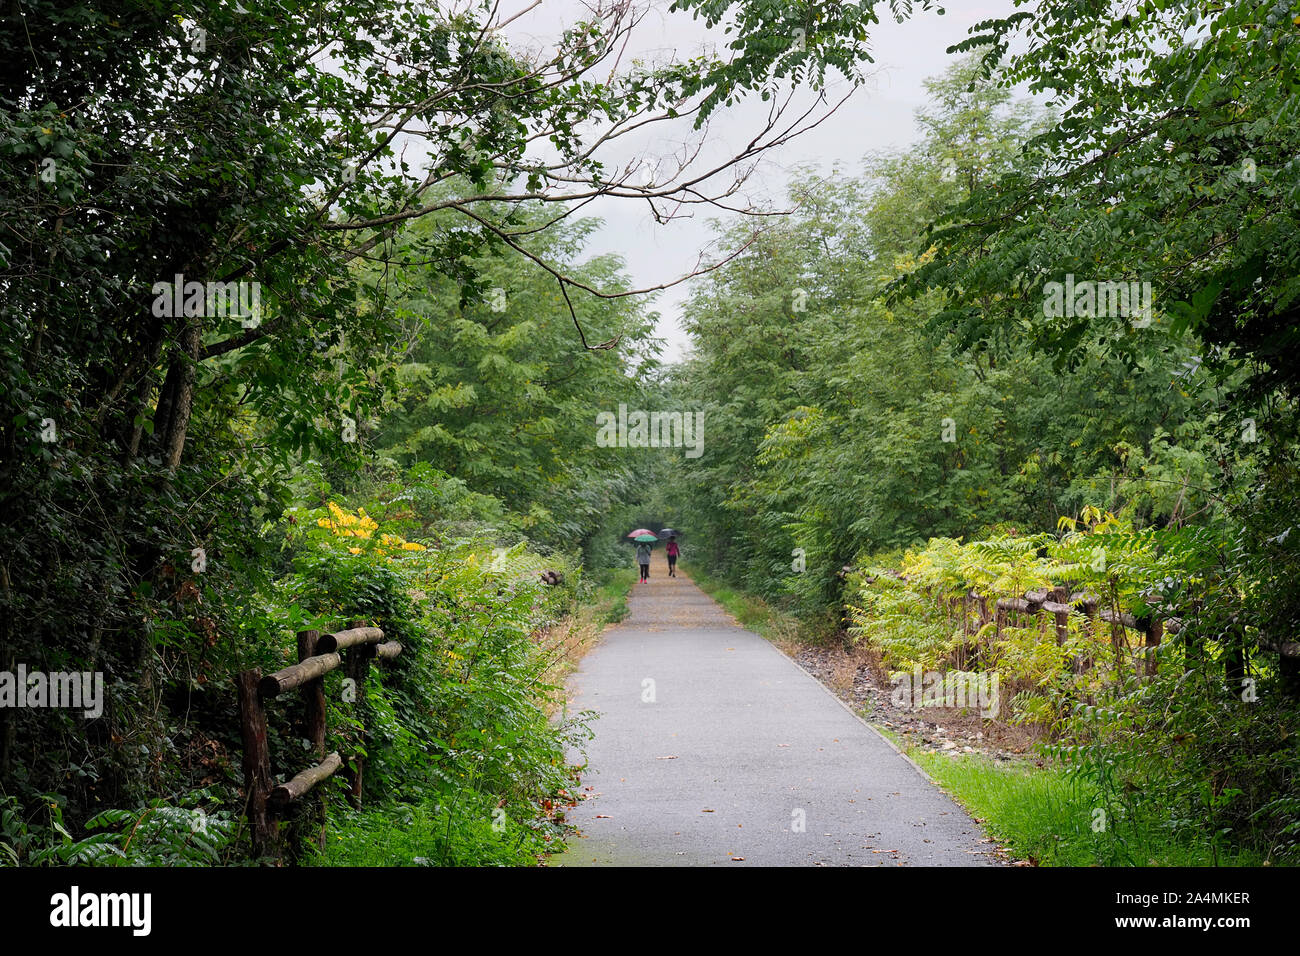 AULLA, LUNIGIANA, ITALY - OCTOBER 14, 2019: The Aulla Greenway is a cycle and pedestrian path making use of the old railway line. Stock Photo